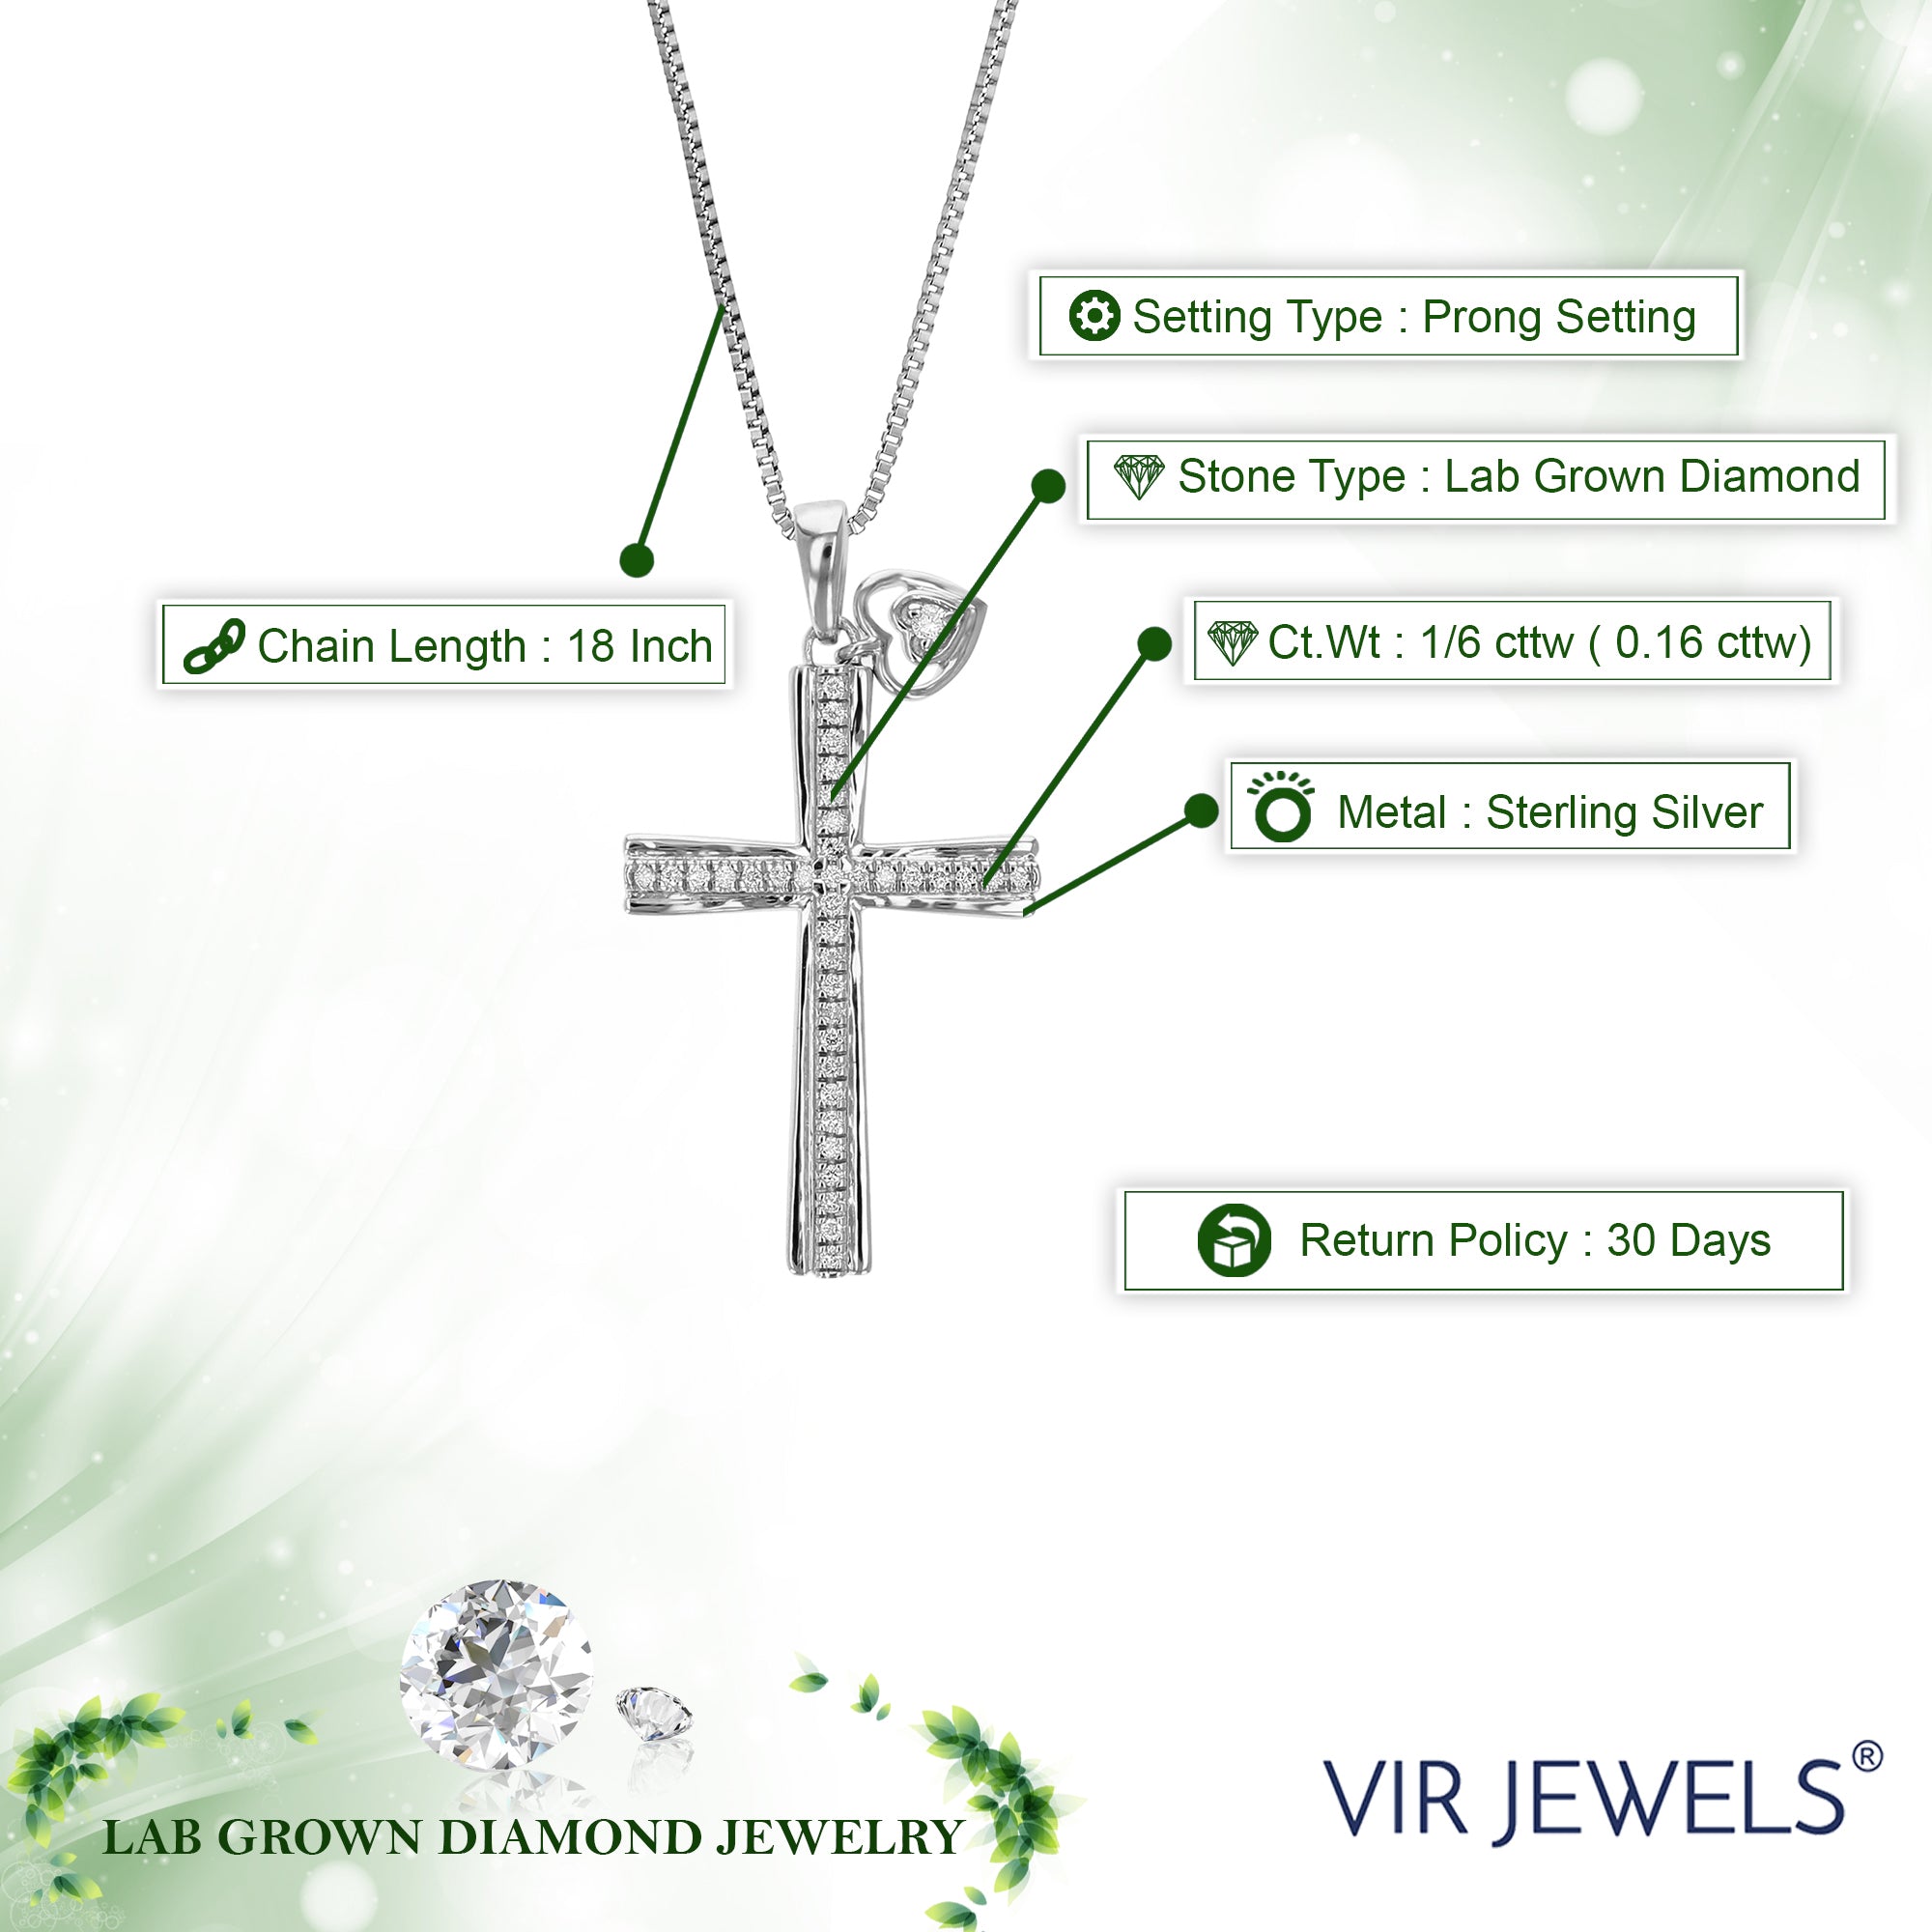 1/6 cttw Diamond Pendant Necklace for Women, Lab Grown Diamond Cross Pendant Necklace in .925 Sterling Silver with Chain, Size 1 1/4 Inch